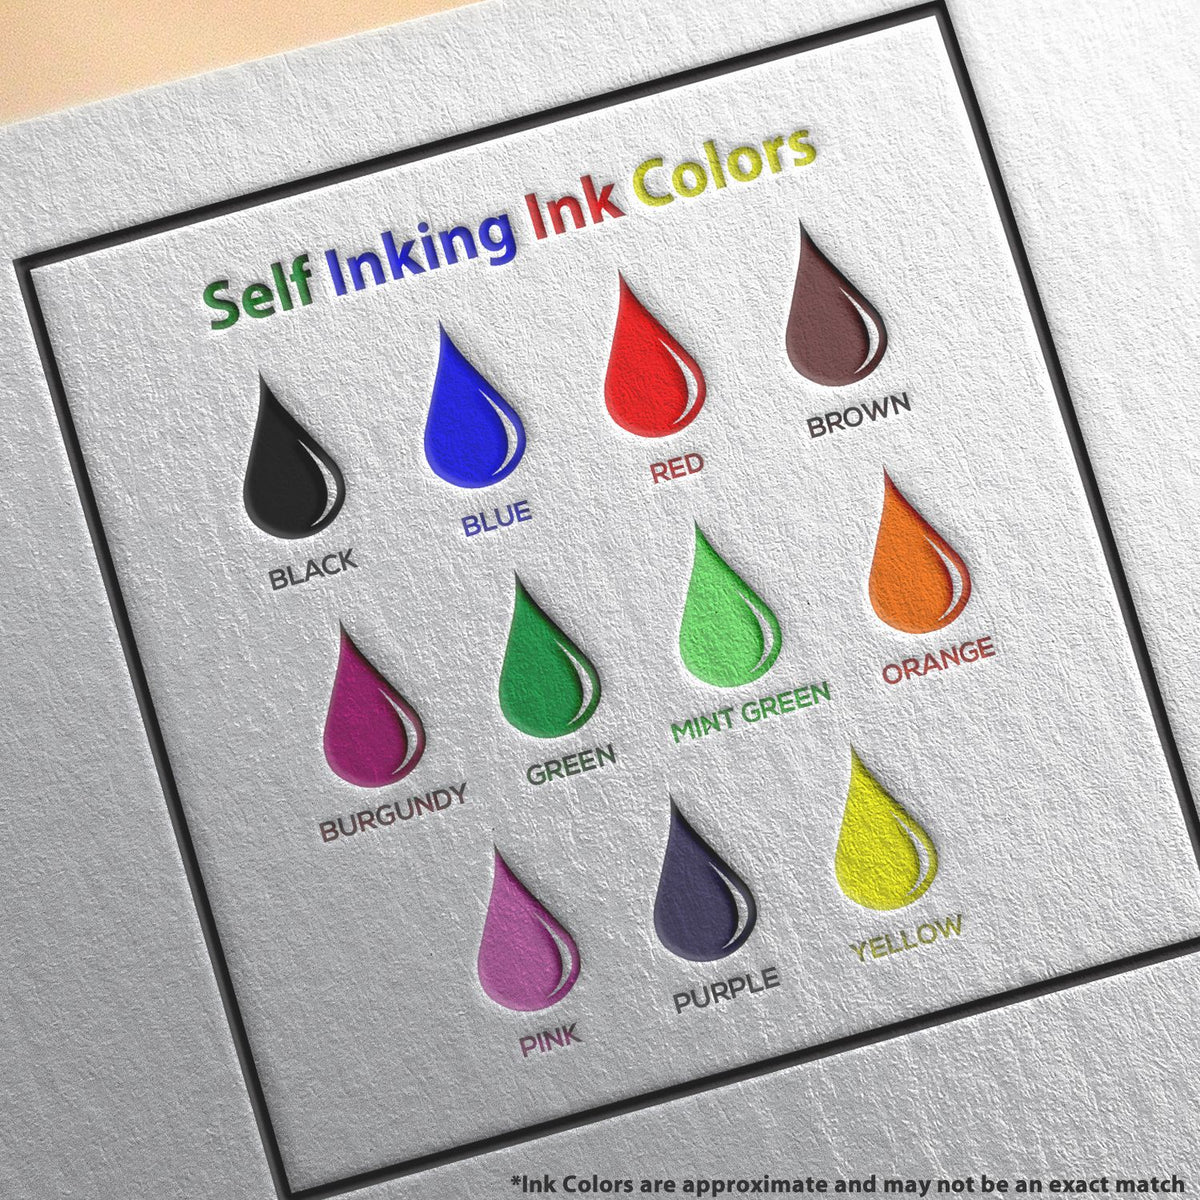 A picture showing the different ink colors or hues available for the Heavy-Duty Oregon Rectangular Notary Stamp product.